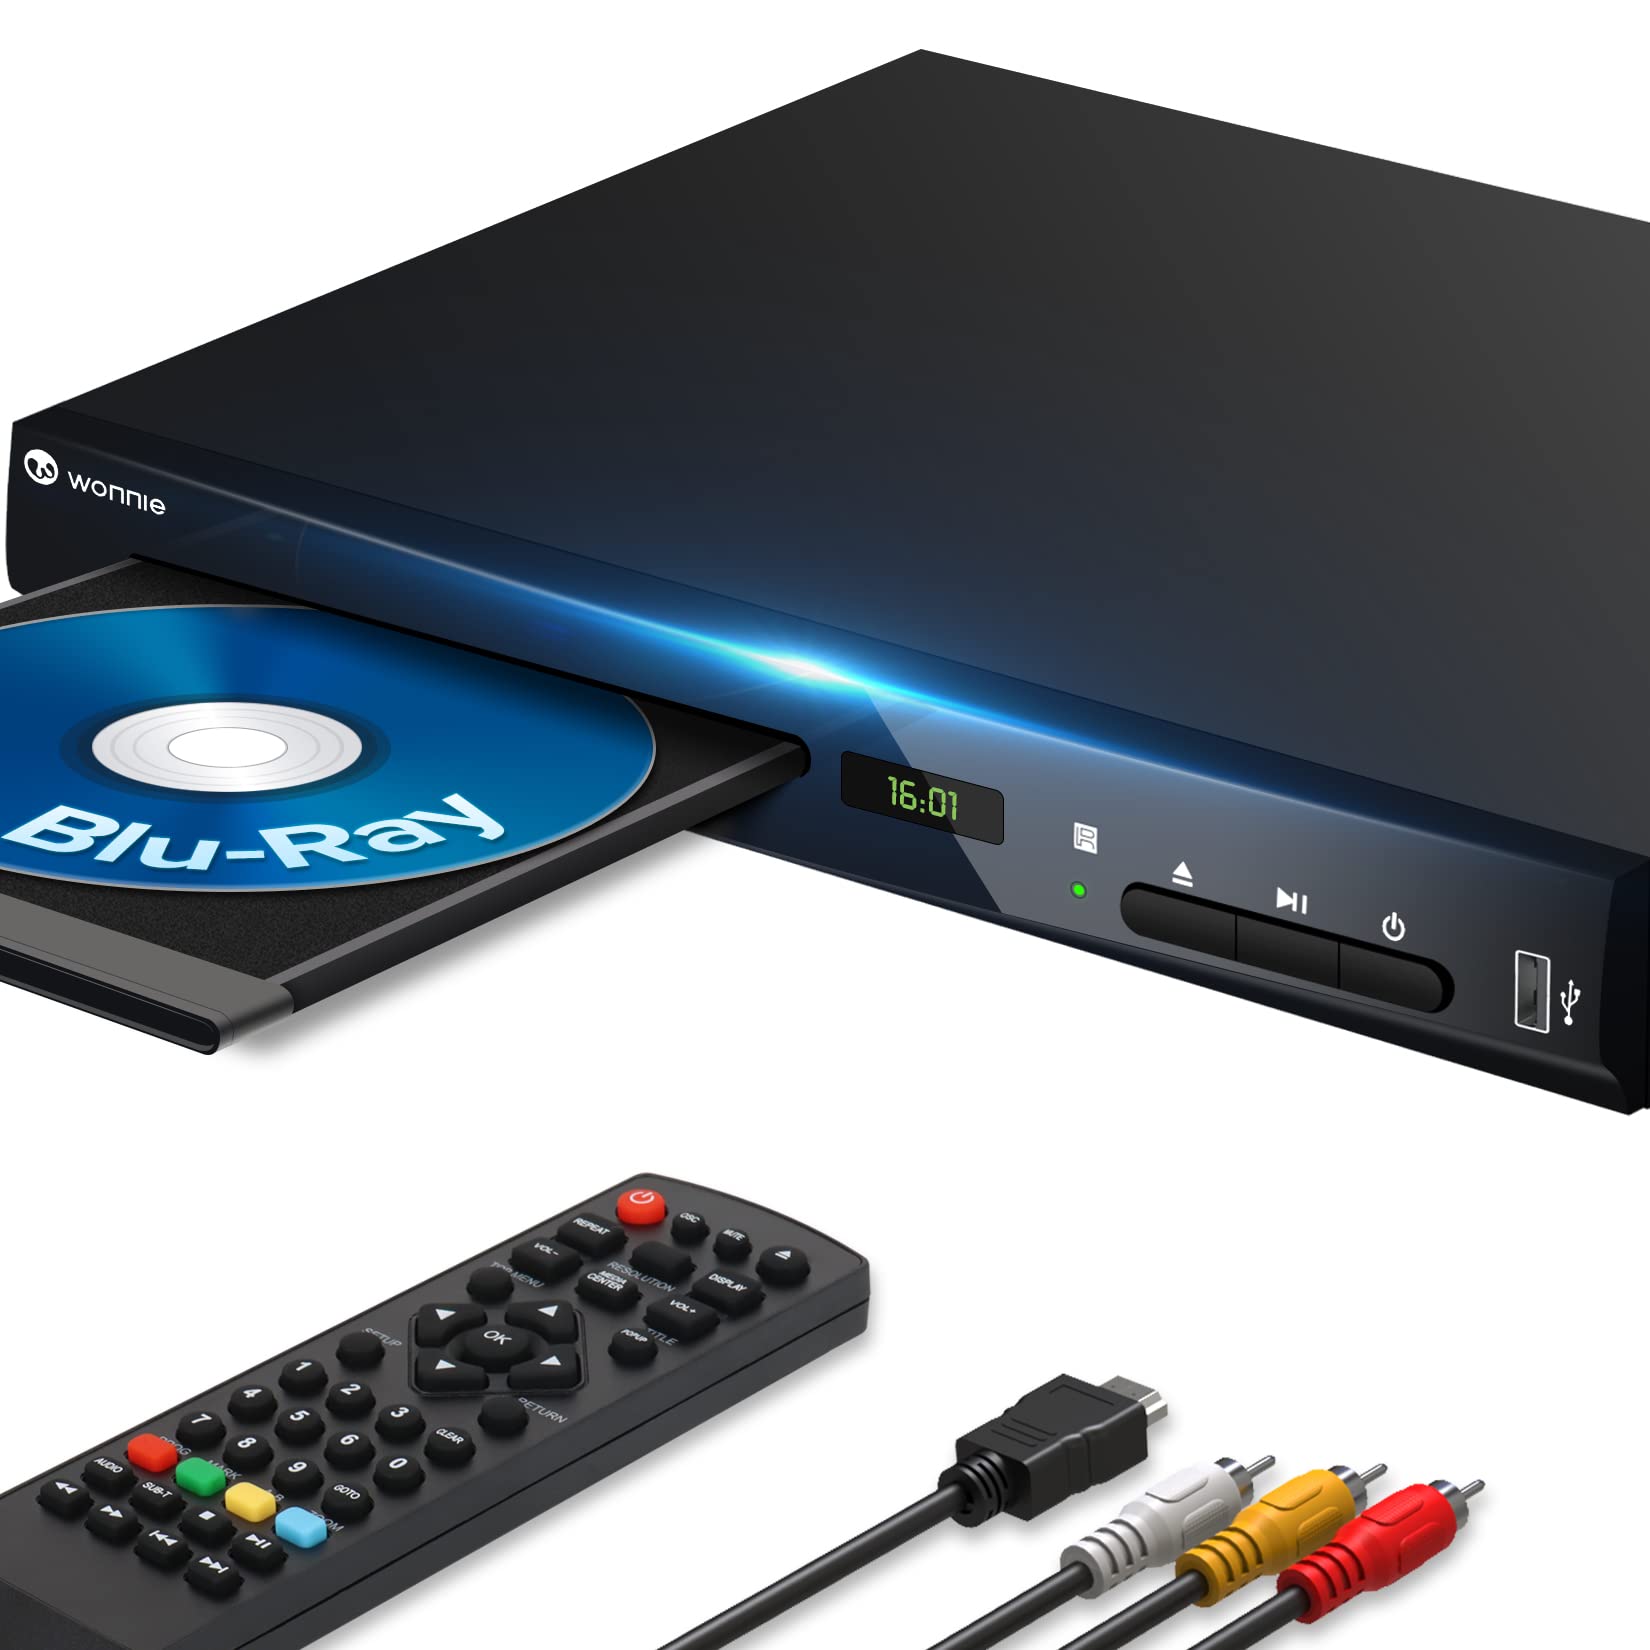 WONNIE Blu-Ray DVD Player for TV, 1080P Full HD Home Disc Players with HDMI Output, Dolby Atmos Audio, Support Region A/1 Blue Ray Dics, Last Memory, USB, NTSC/PAL